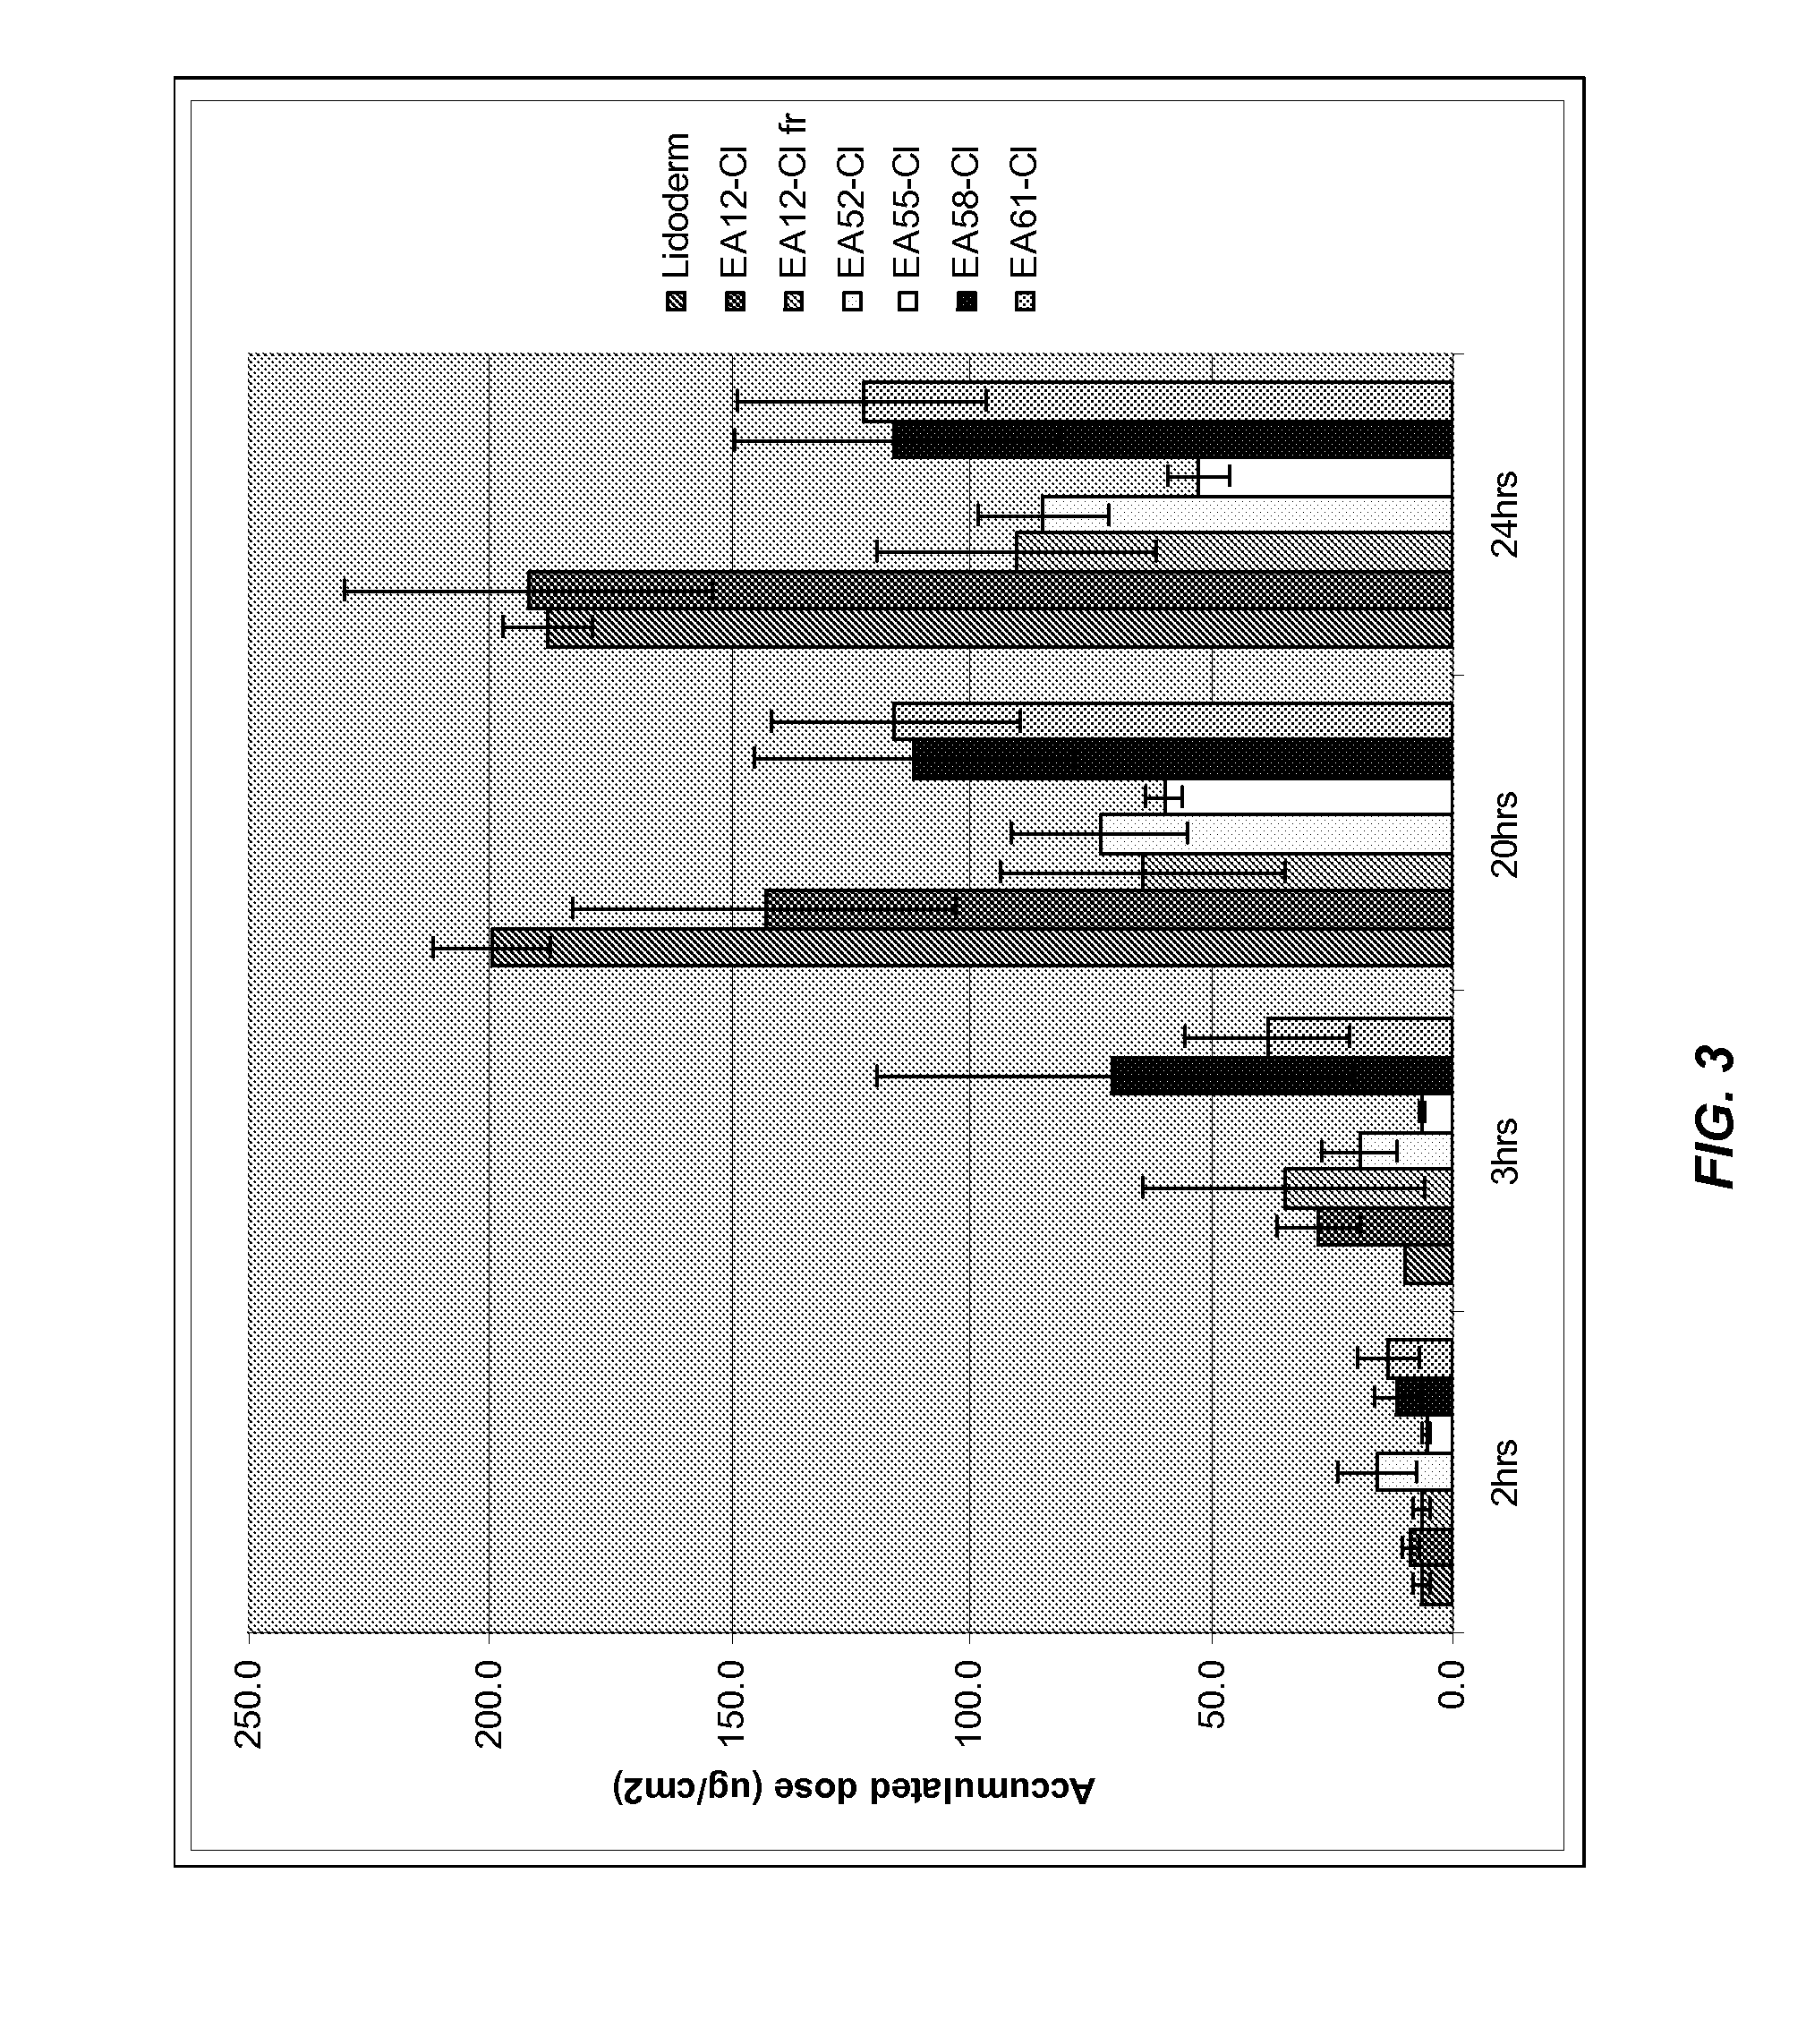 Pharmaceutical formulations and methods of use